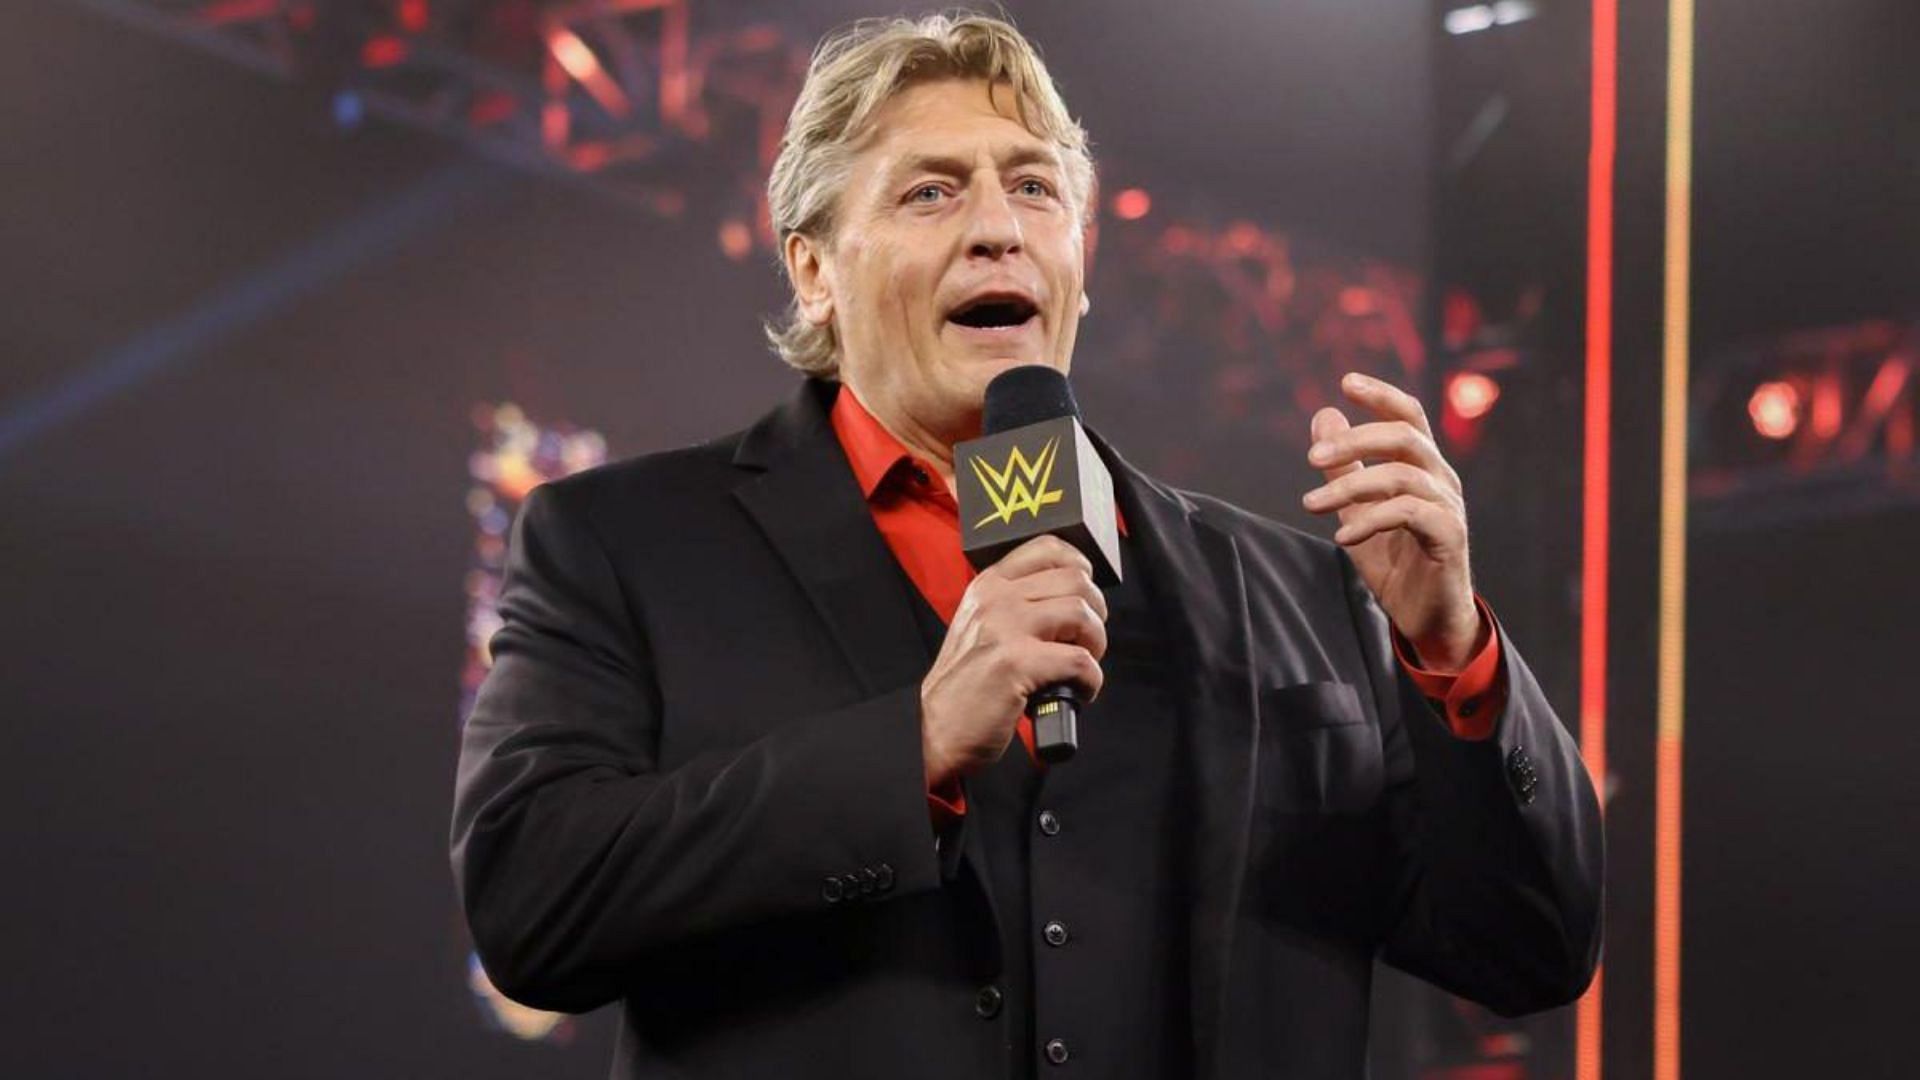 William Regal was released by WWE earlier this year